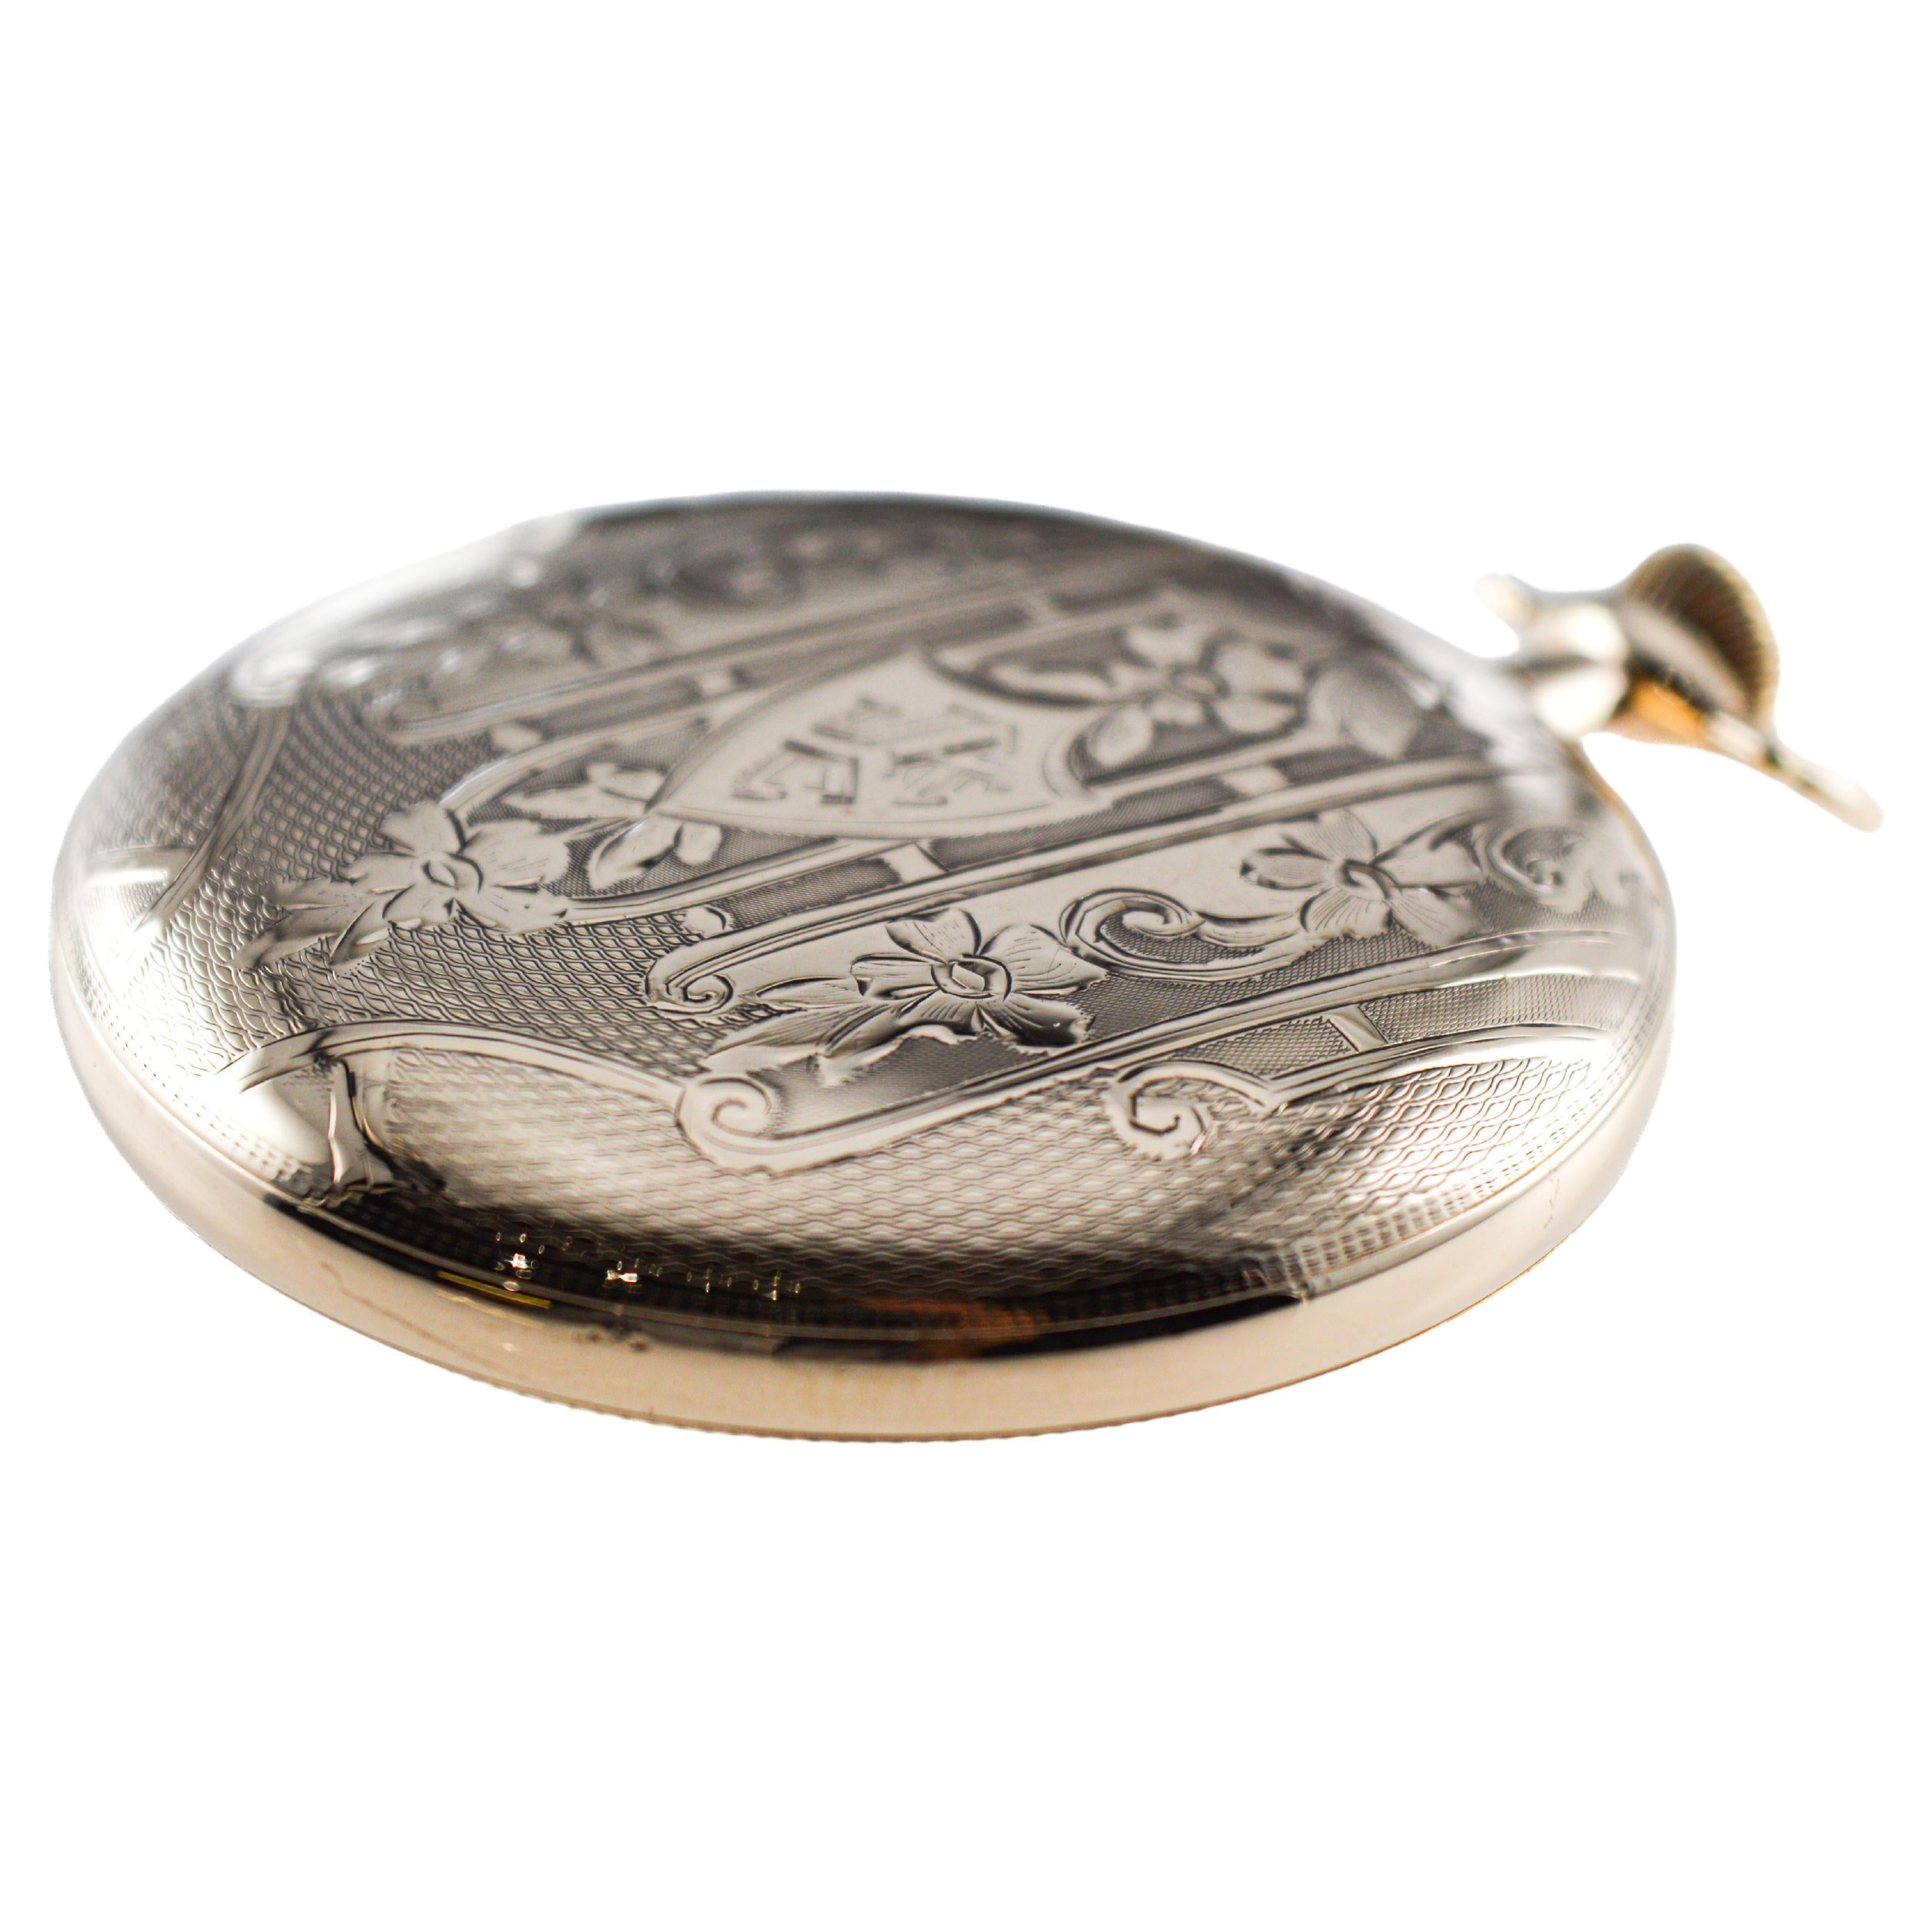 Elgin Gold Filled Art Deco Pocket Watch with Original Aged Crystal From 1916 2